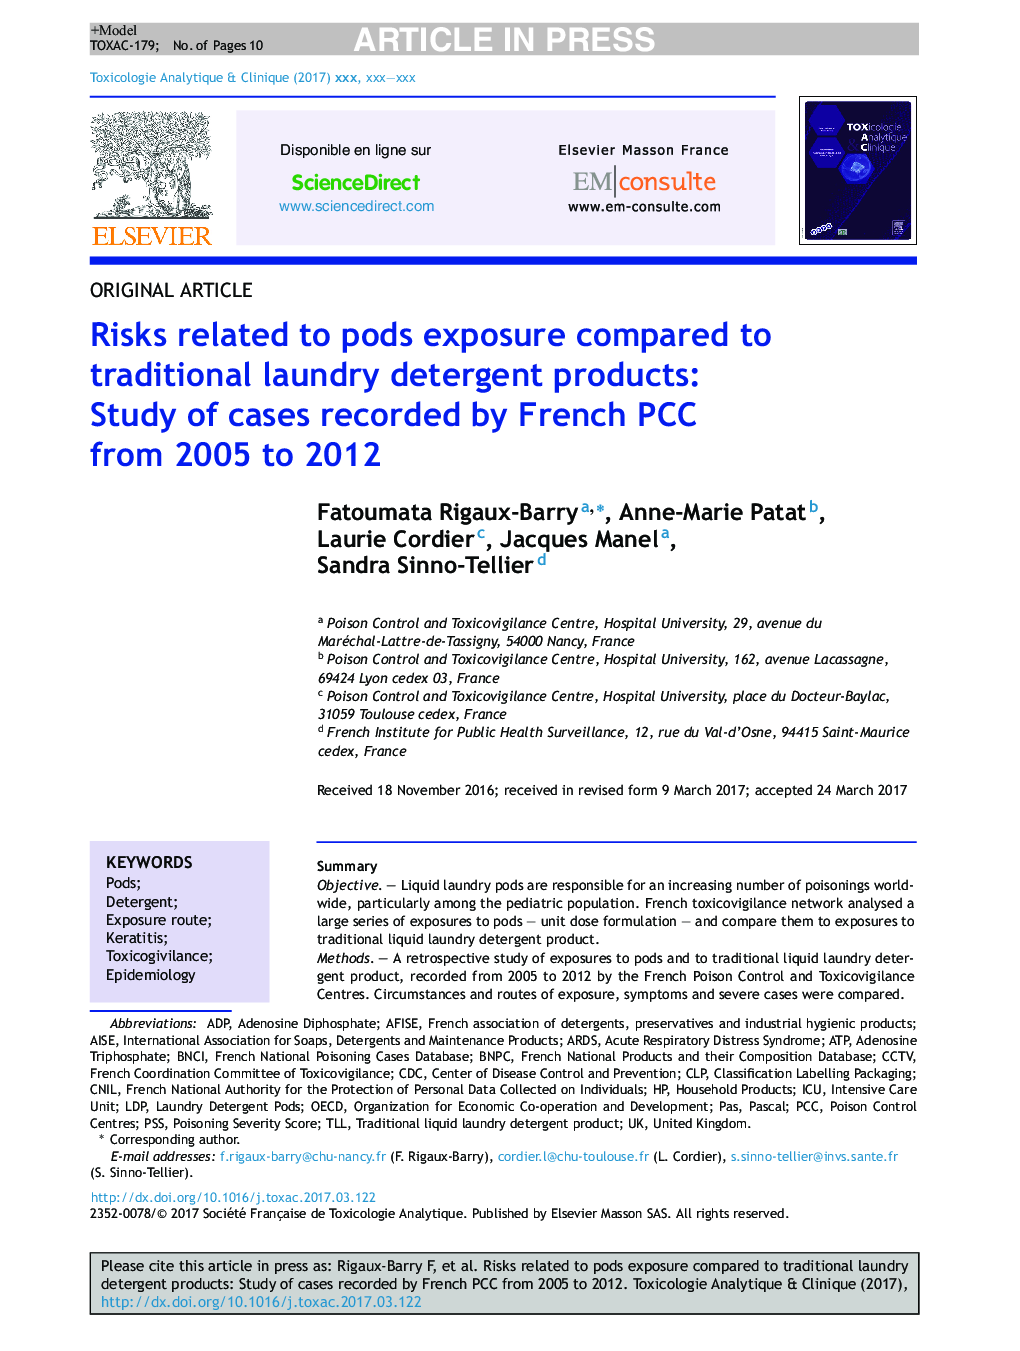 Risks related to pods exposure compared to traditional laundry detergent products: Study of cases recorded by French PCC from 2005 to 2012